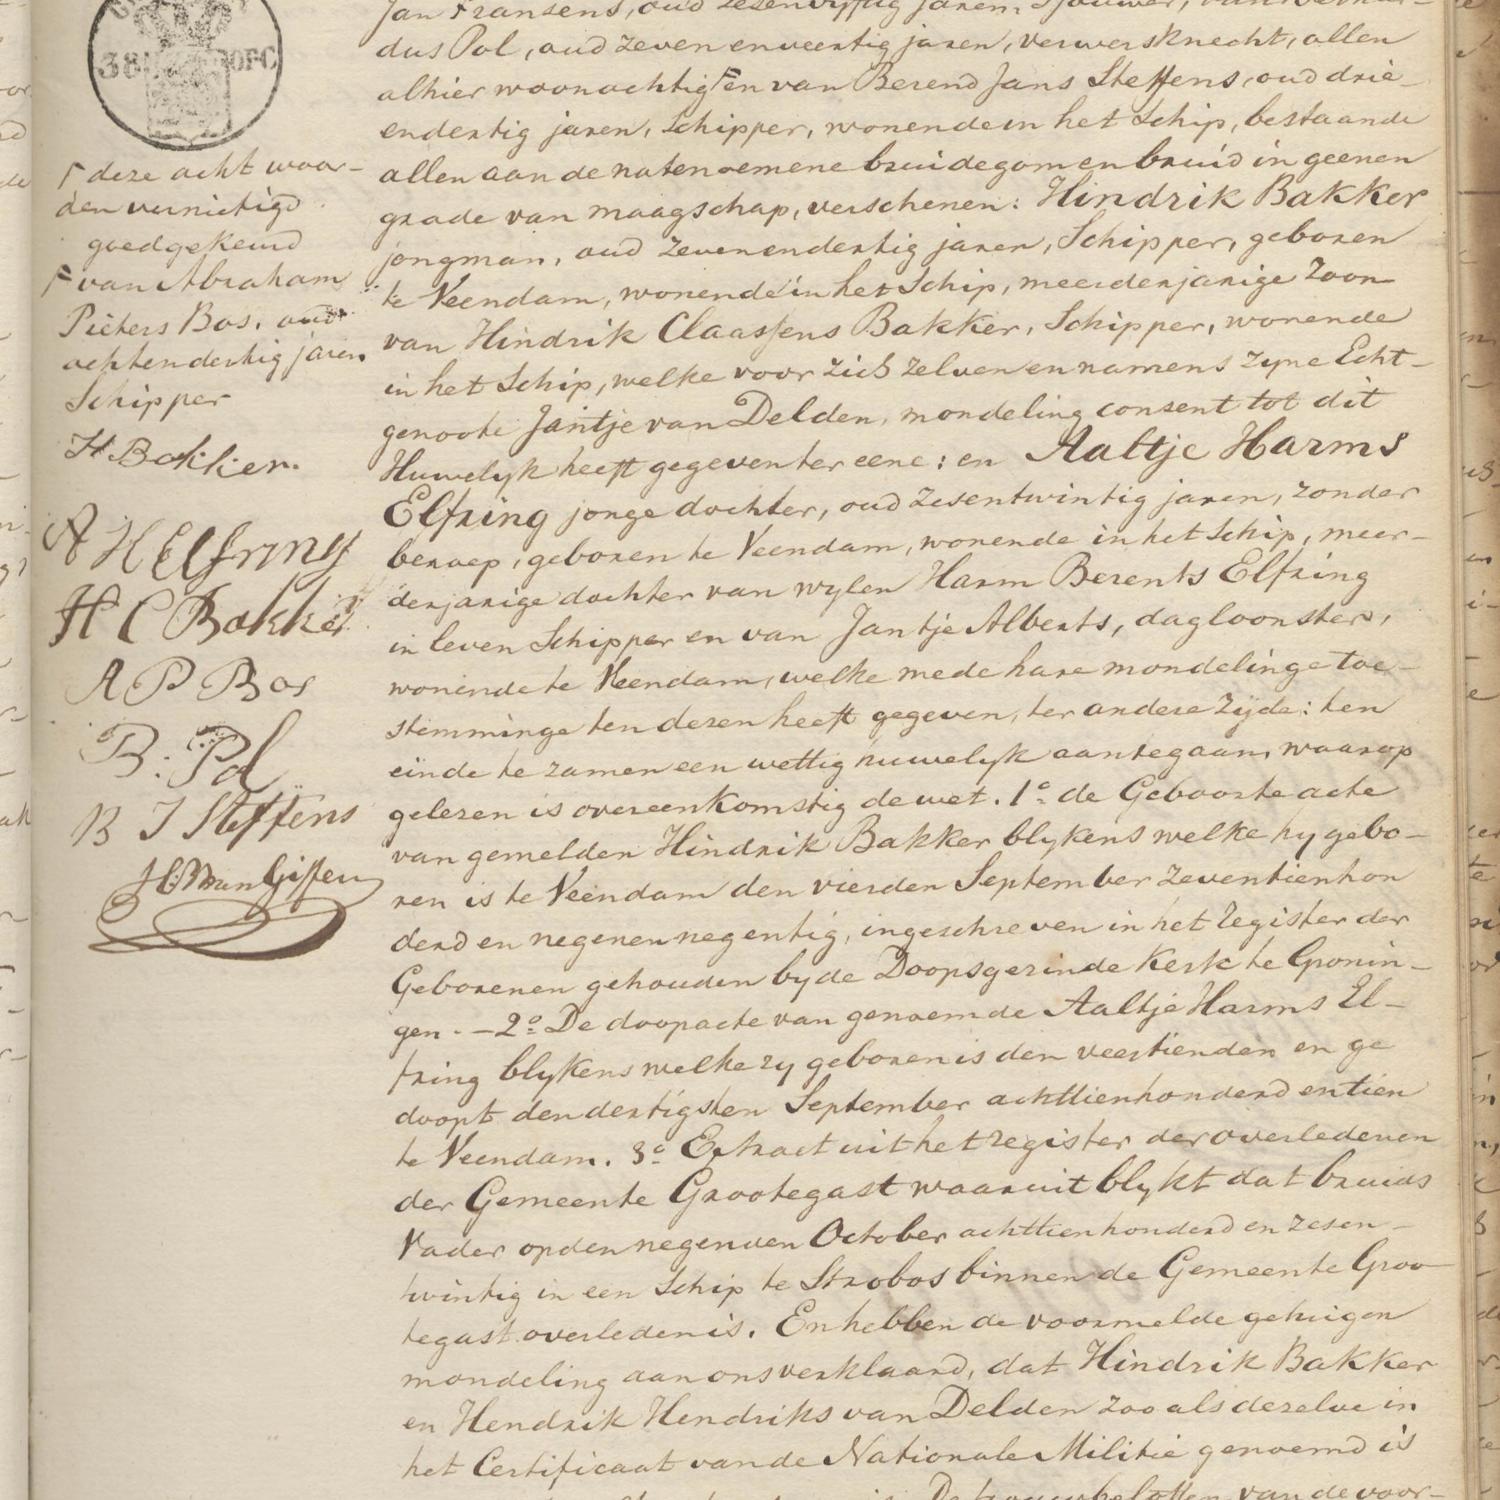 Civil registry of marriages, Groningen, 1836, record 232, page 1